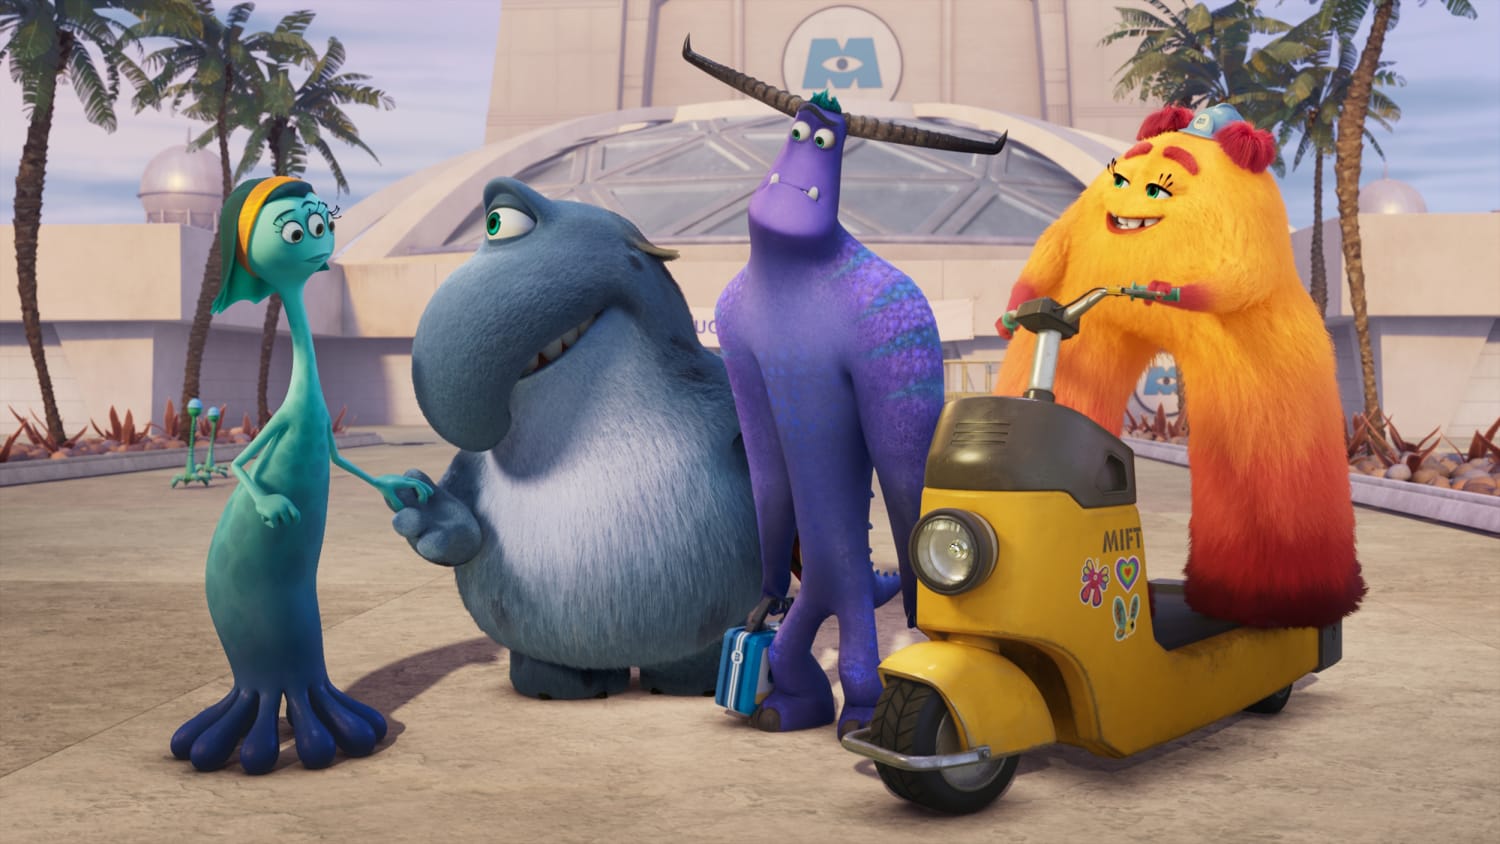 New Disney+ animated series 'Monsters at Work' doesn't live up to its ' Monsters, Inc.' legacy